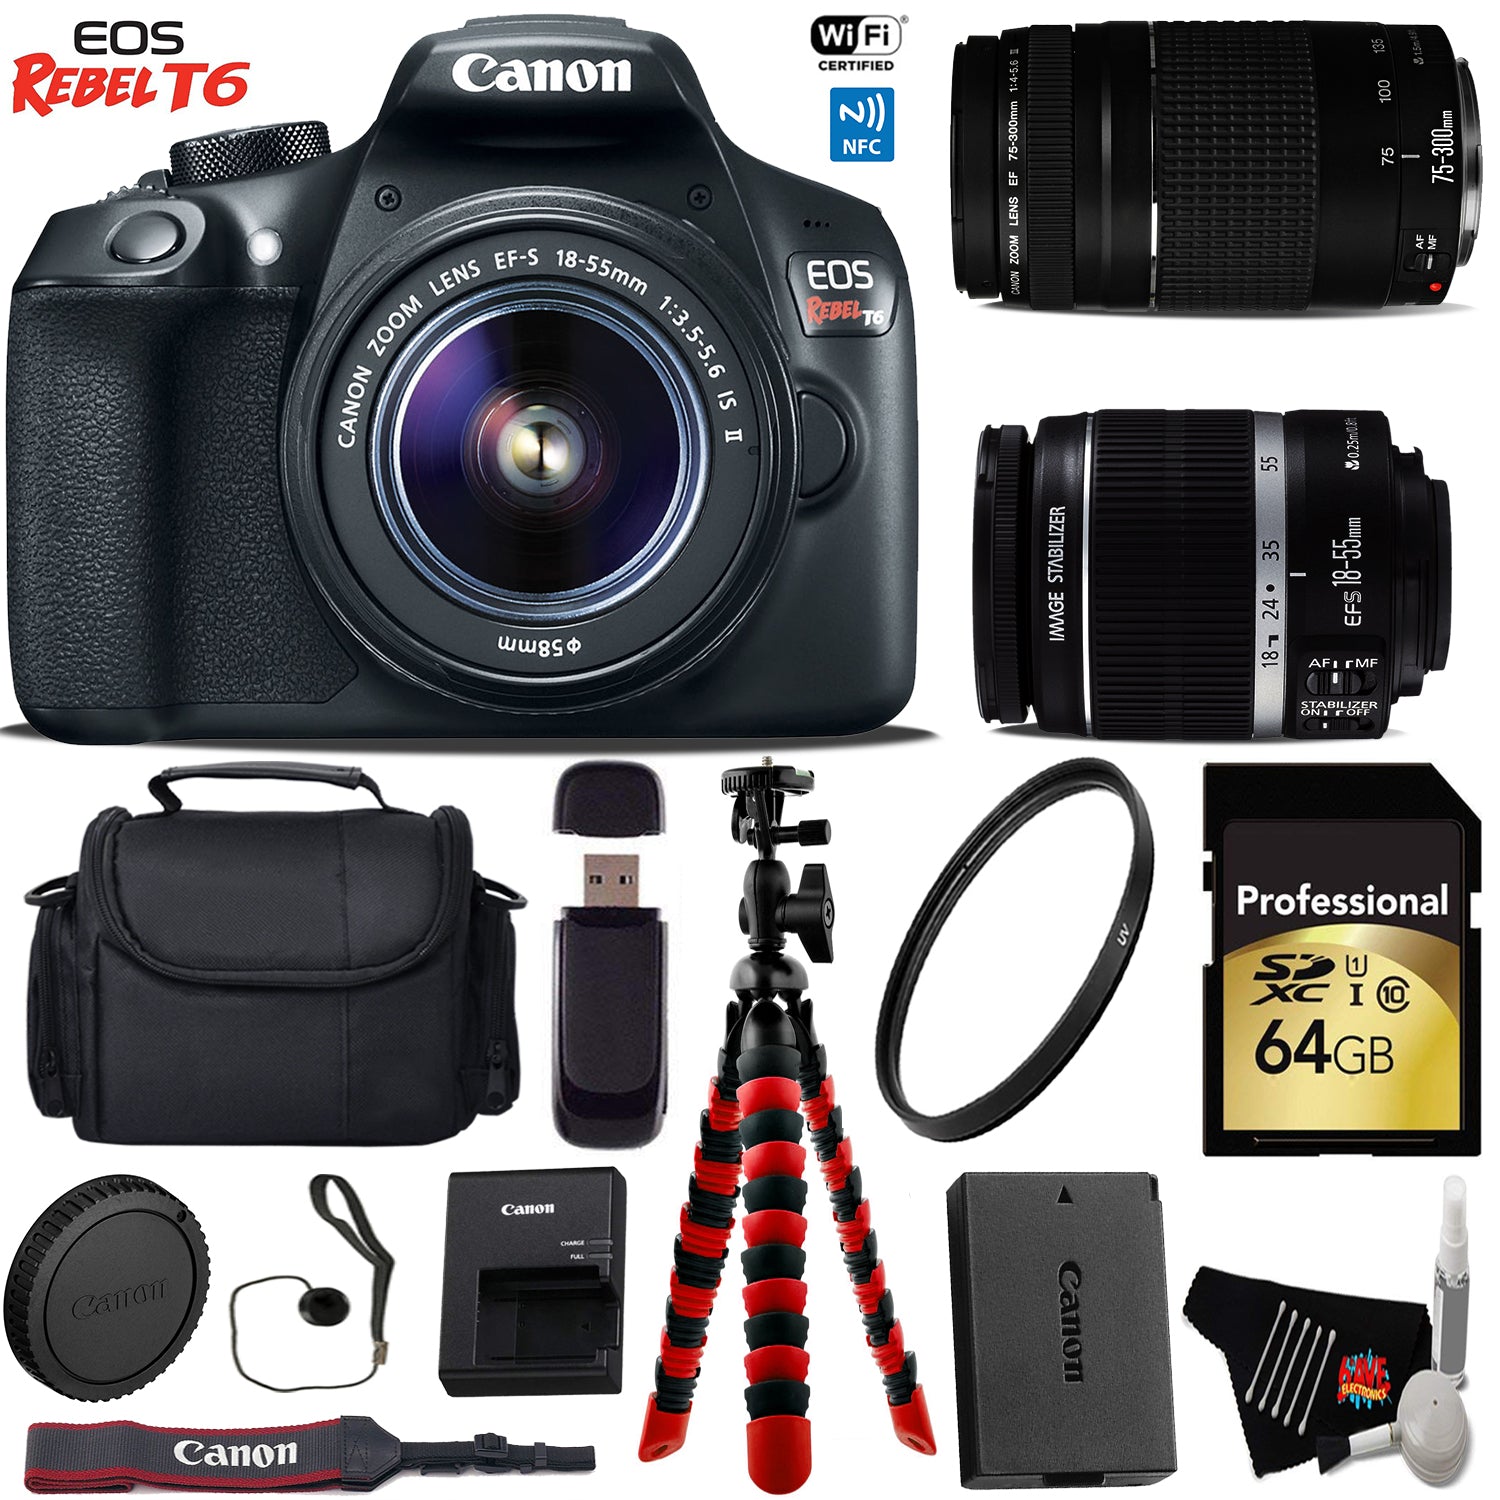 Canon EOS Rebel T6 DSLR Camera with 18-55mm is II Lens & 75-300mm III Lens + Flexible Tripod + UV Protection Filter Pro Bundle